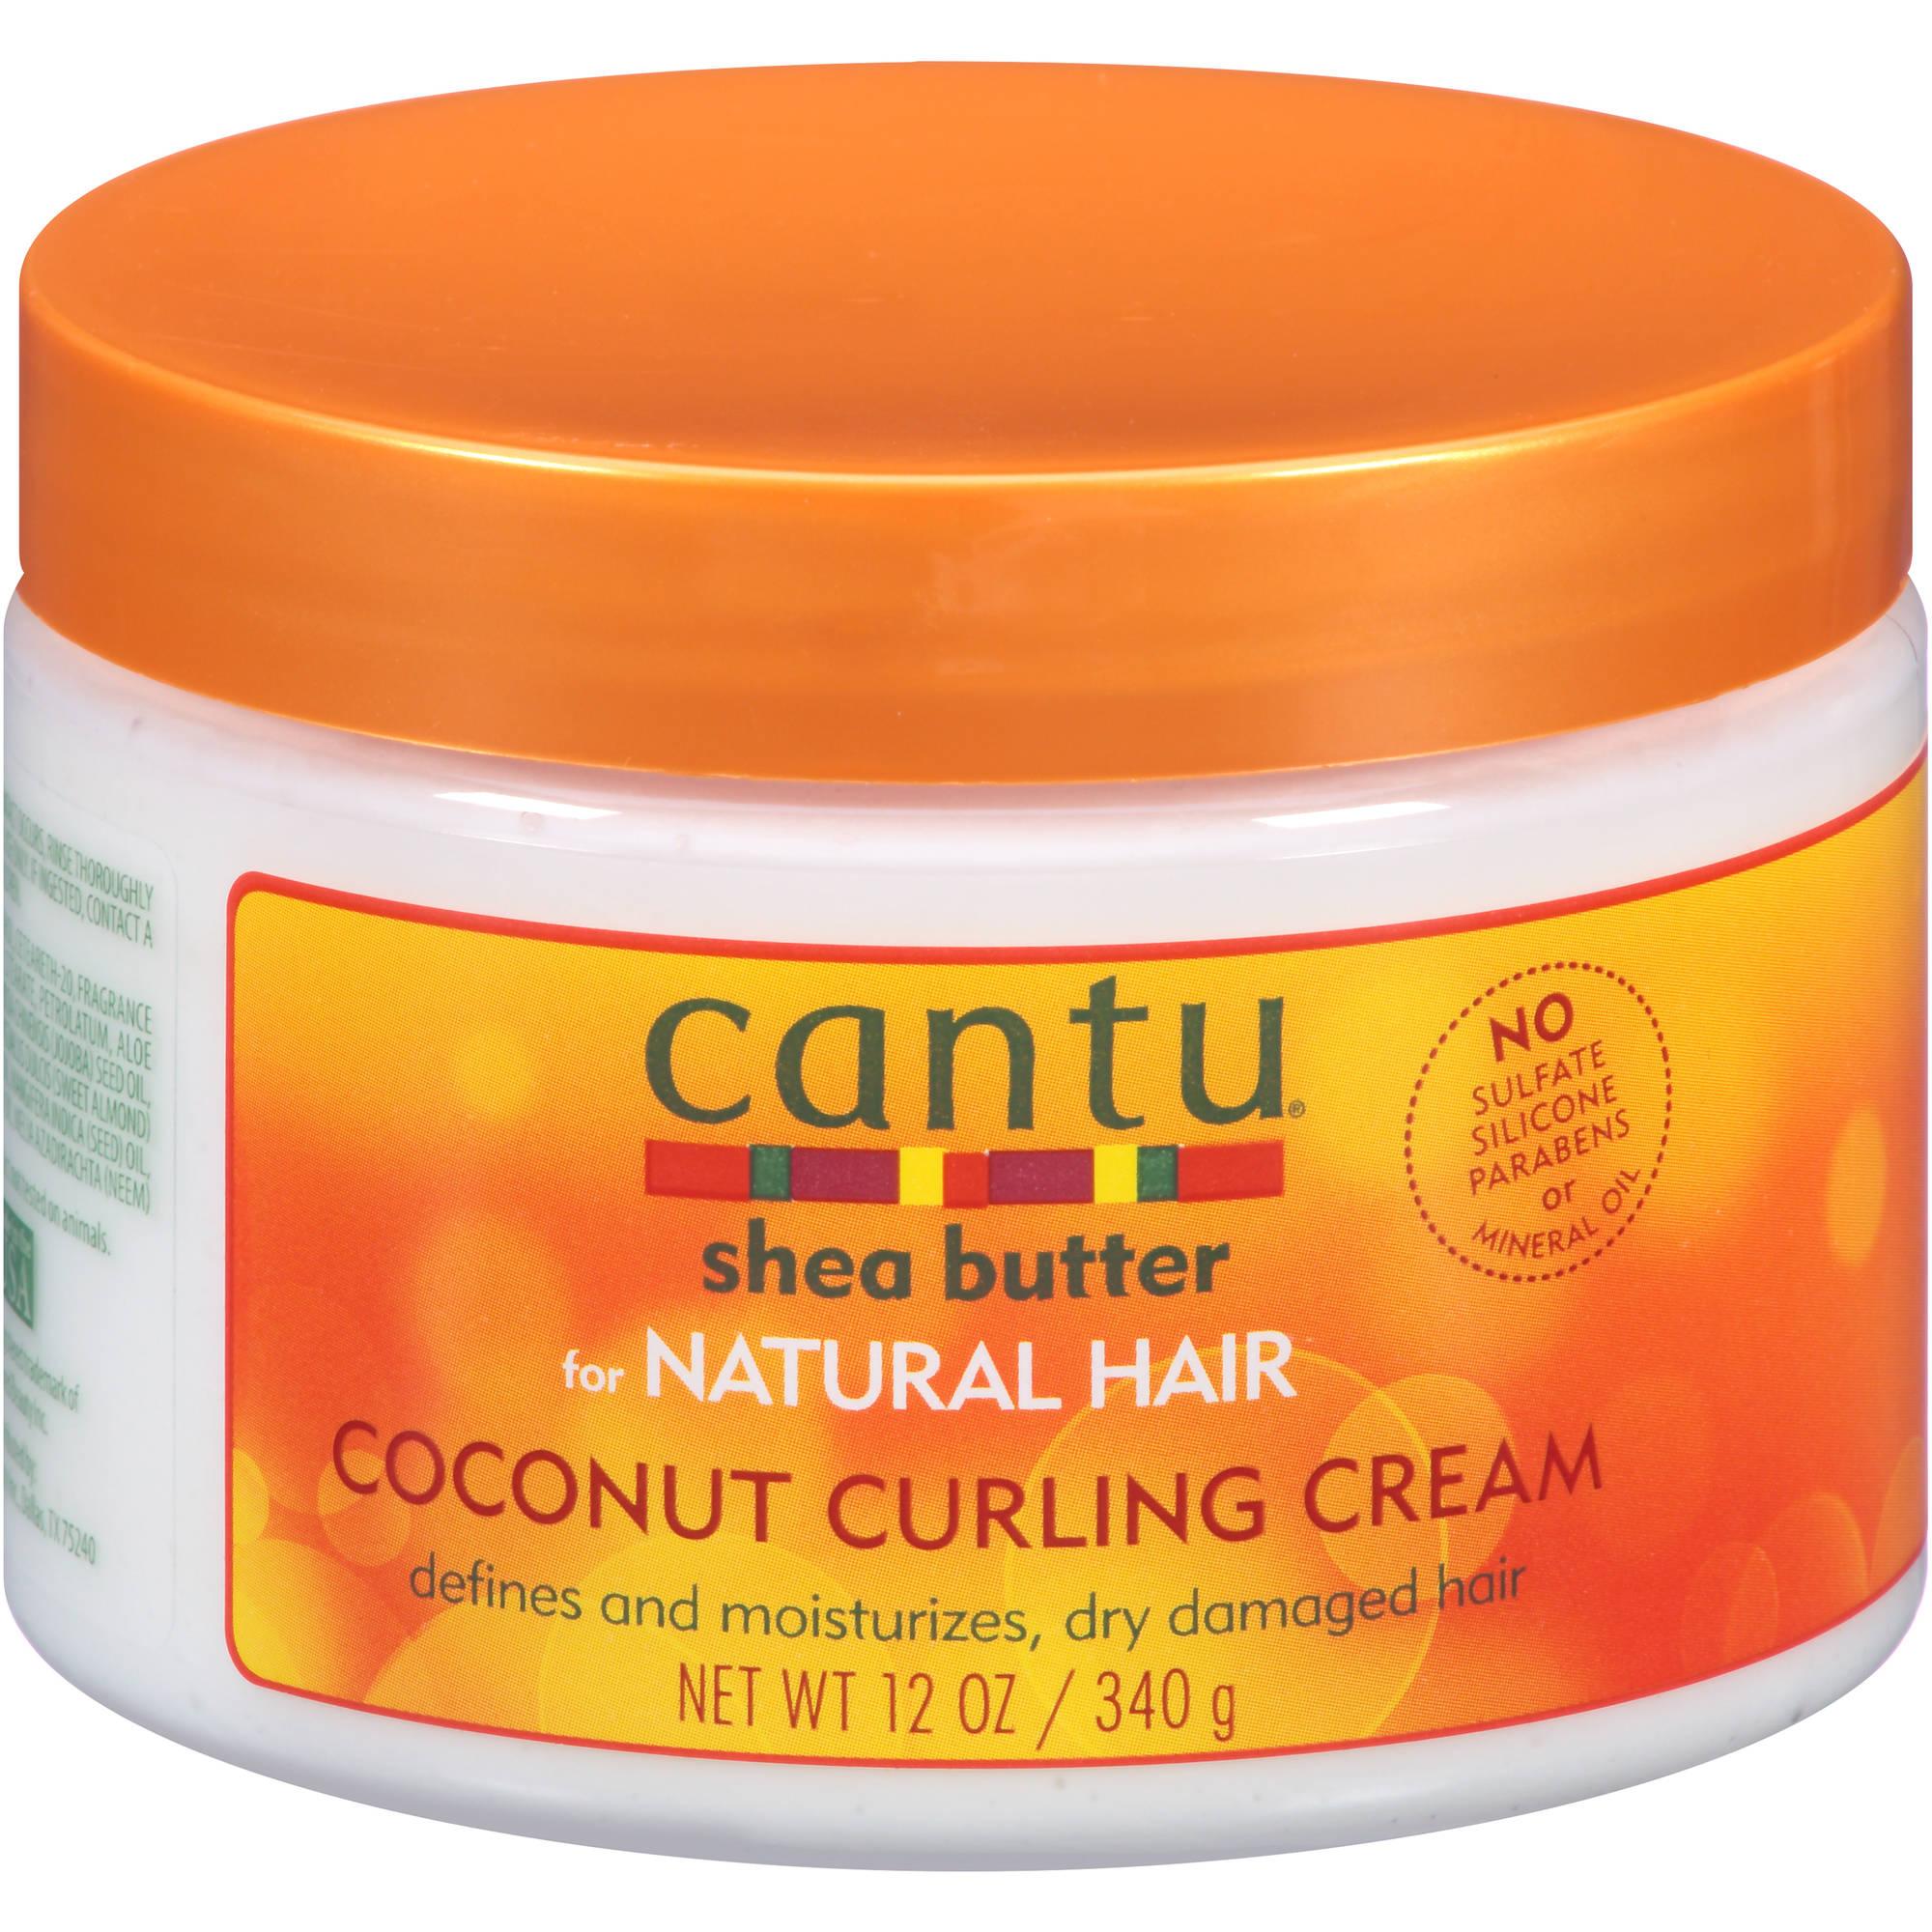 Curl Up Product Review | Curly Girl in Malayalam - YouTube